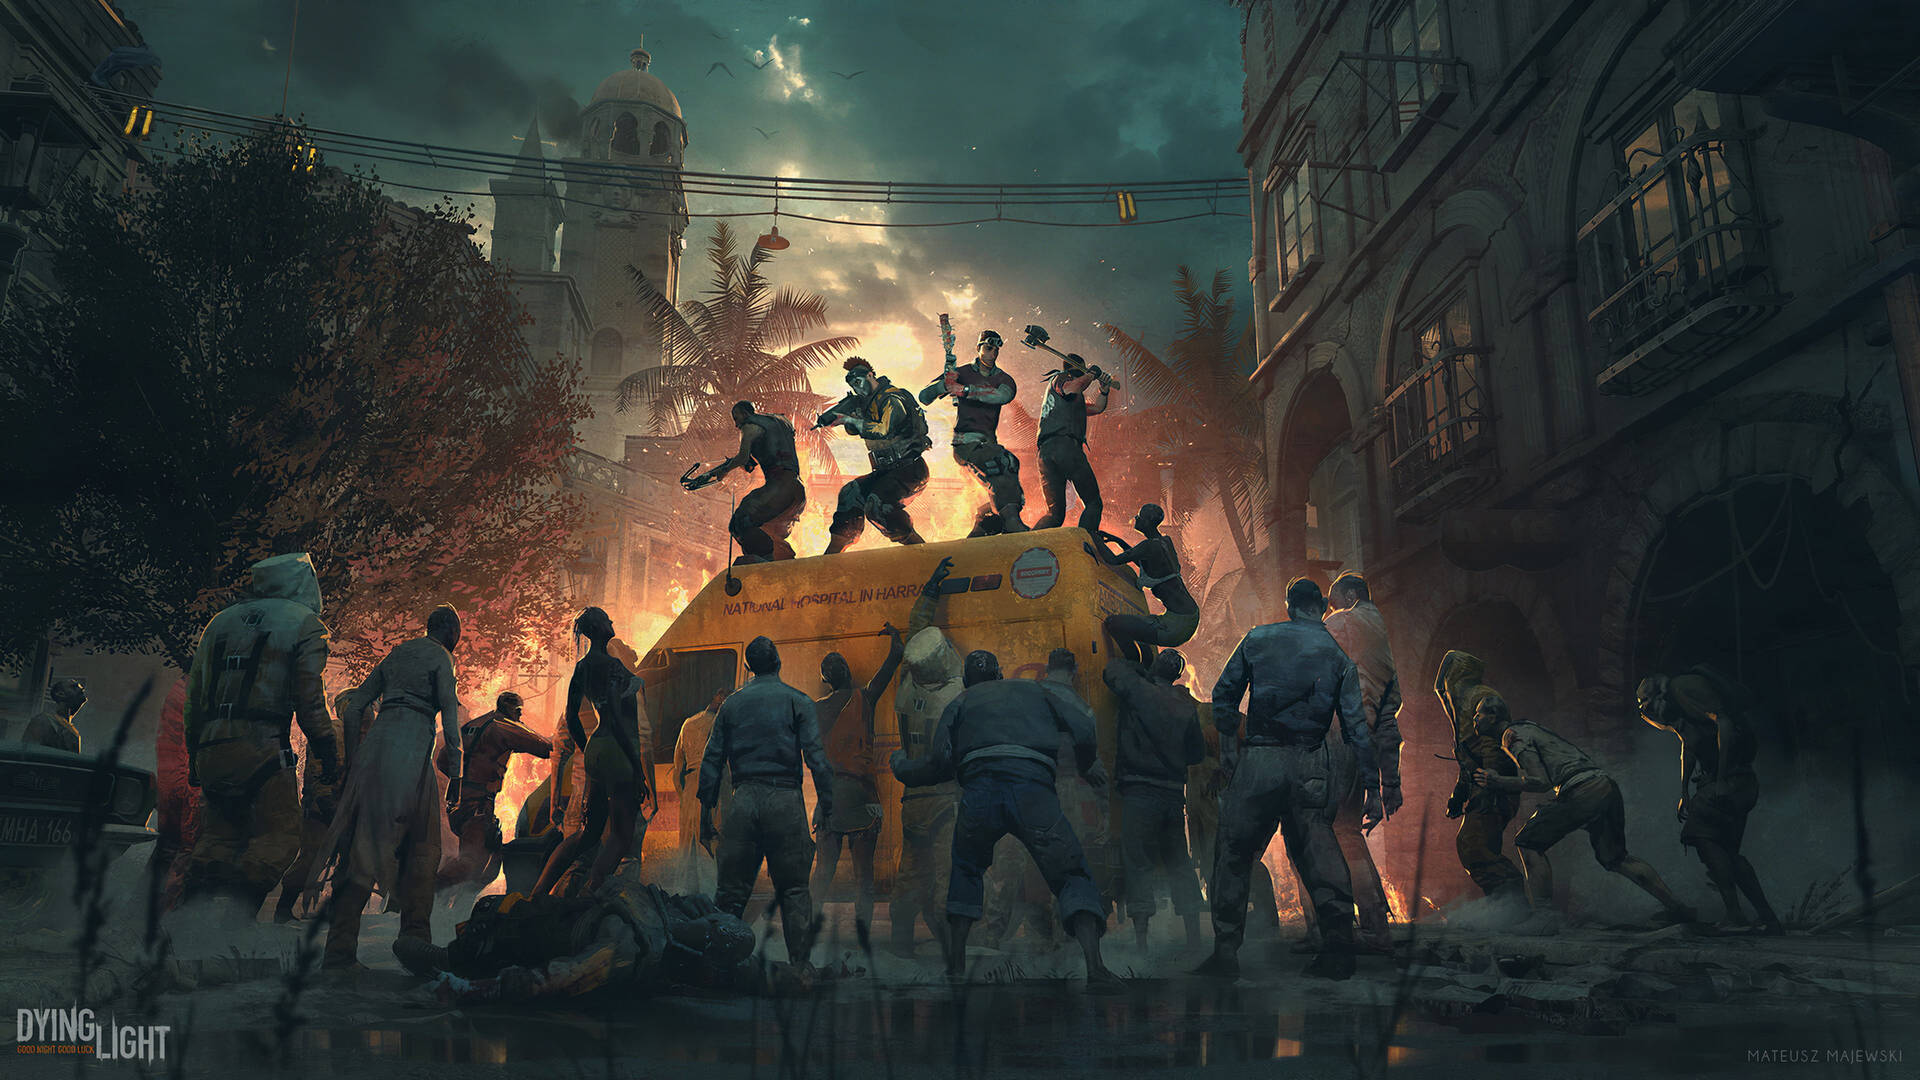 Caption: Thrilling Encounter In Dying Light 2 Cityscape Background